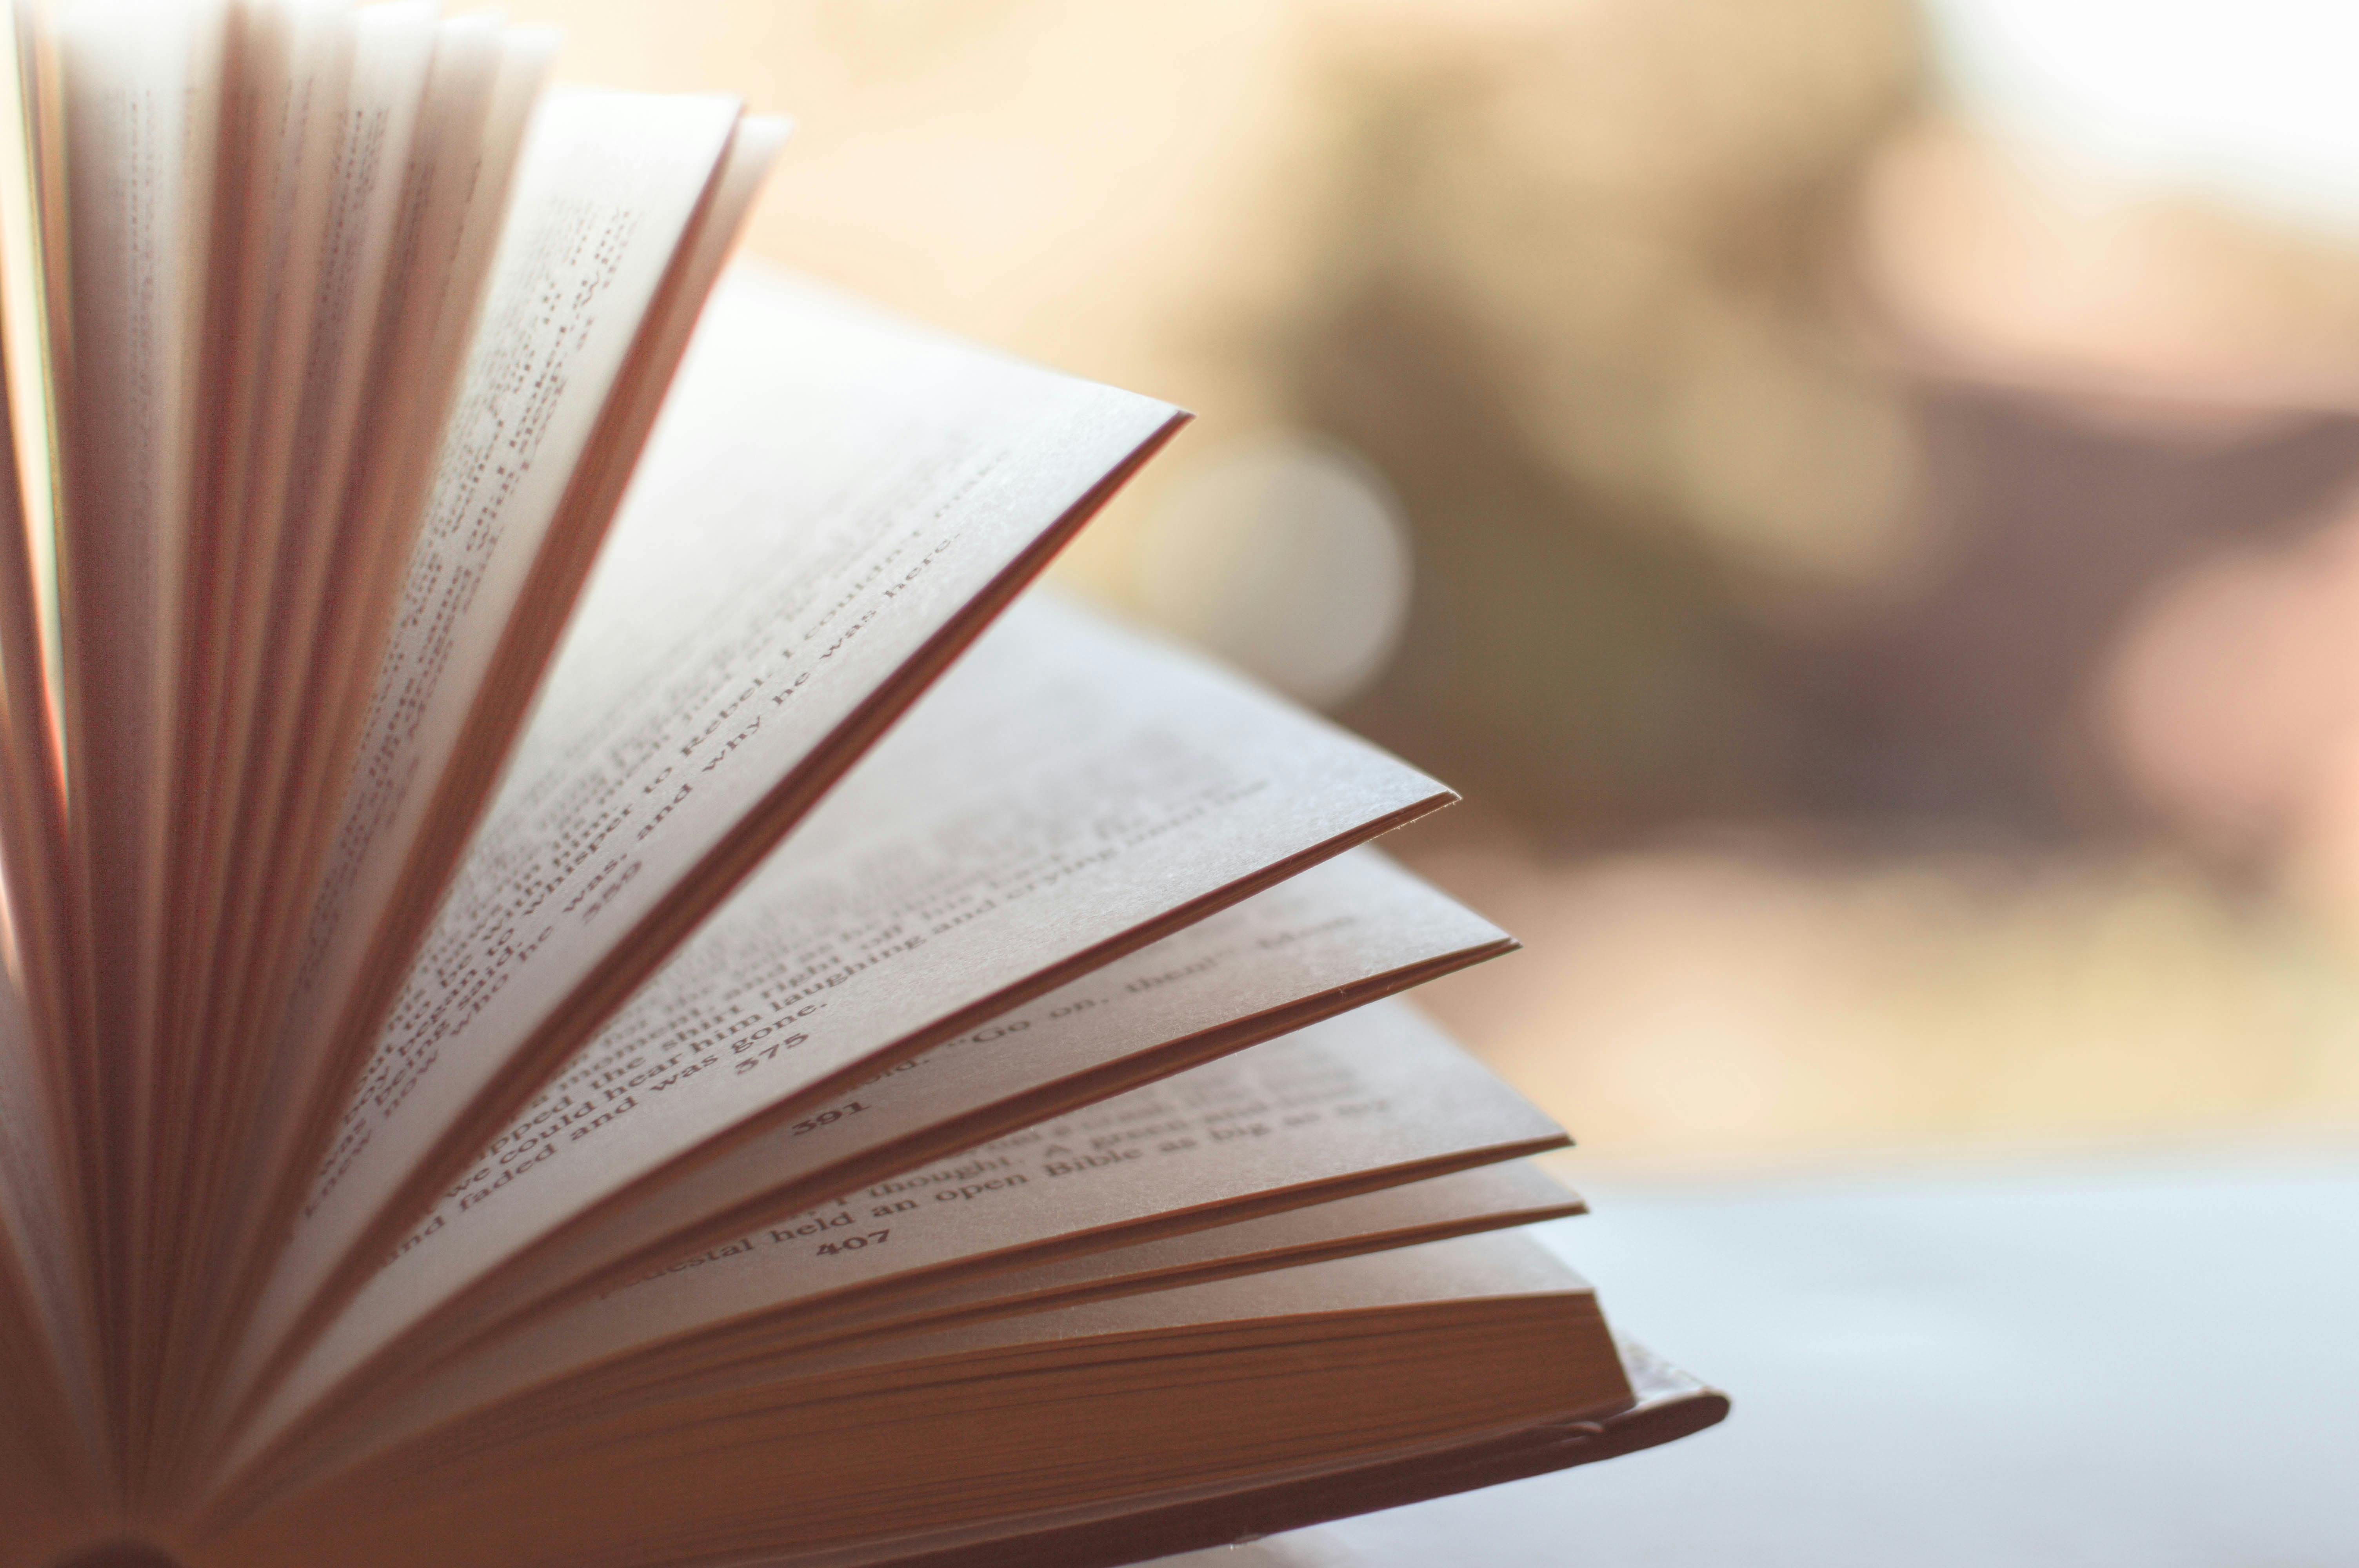 Book Opened on White Surface Selective Focus Photography · Free Stock Photo